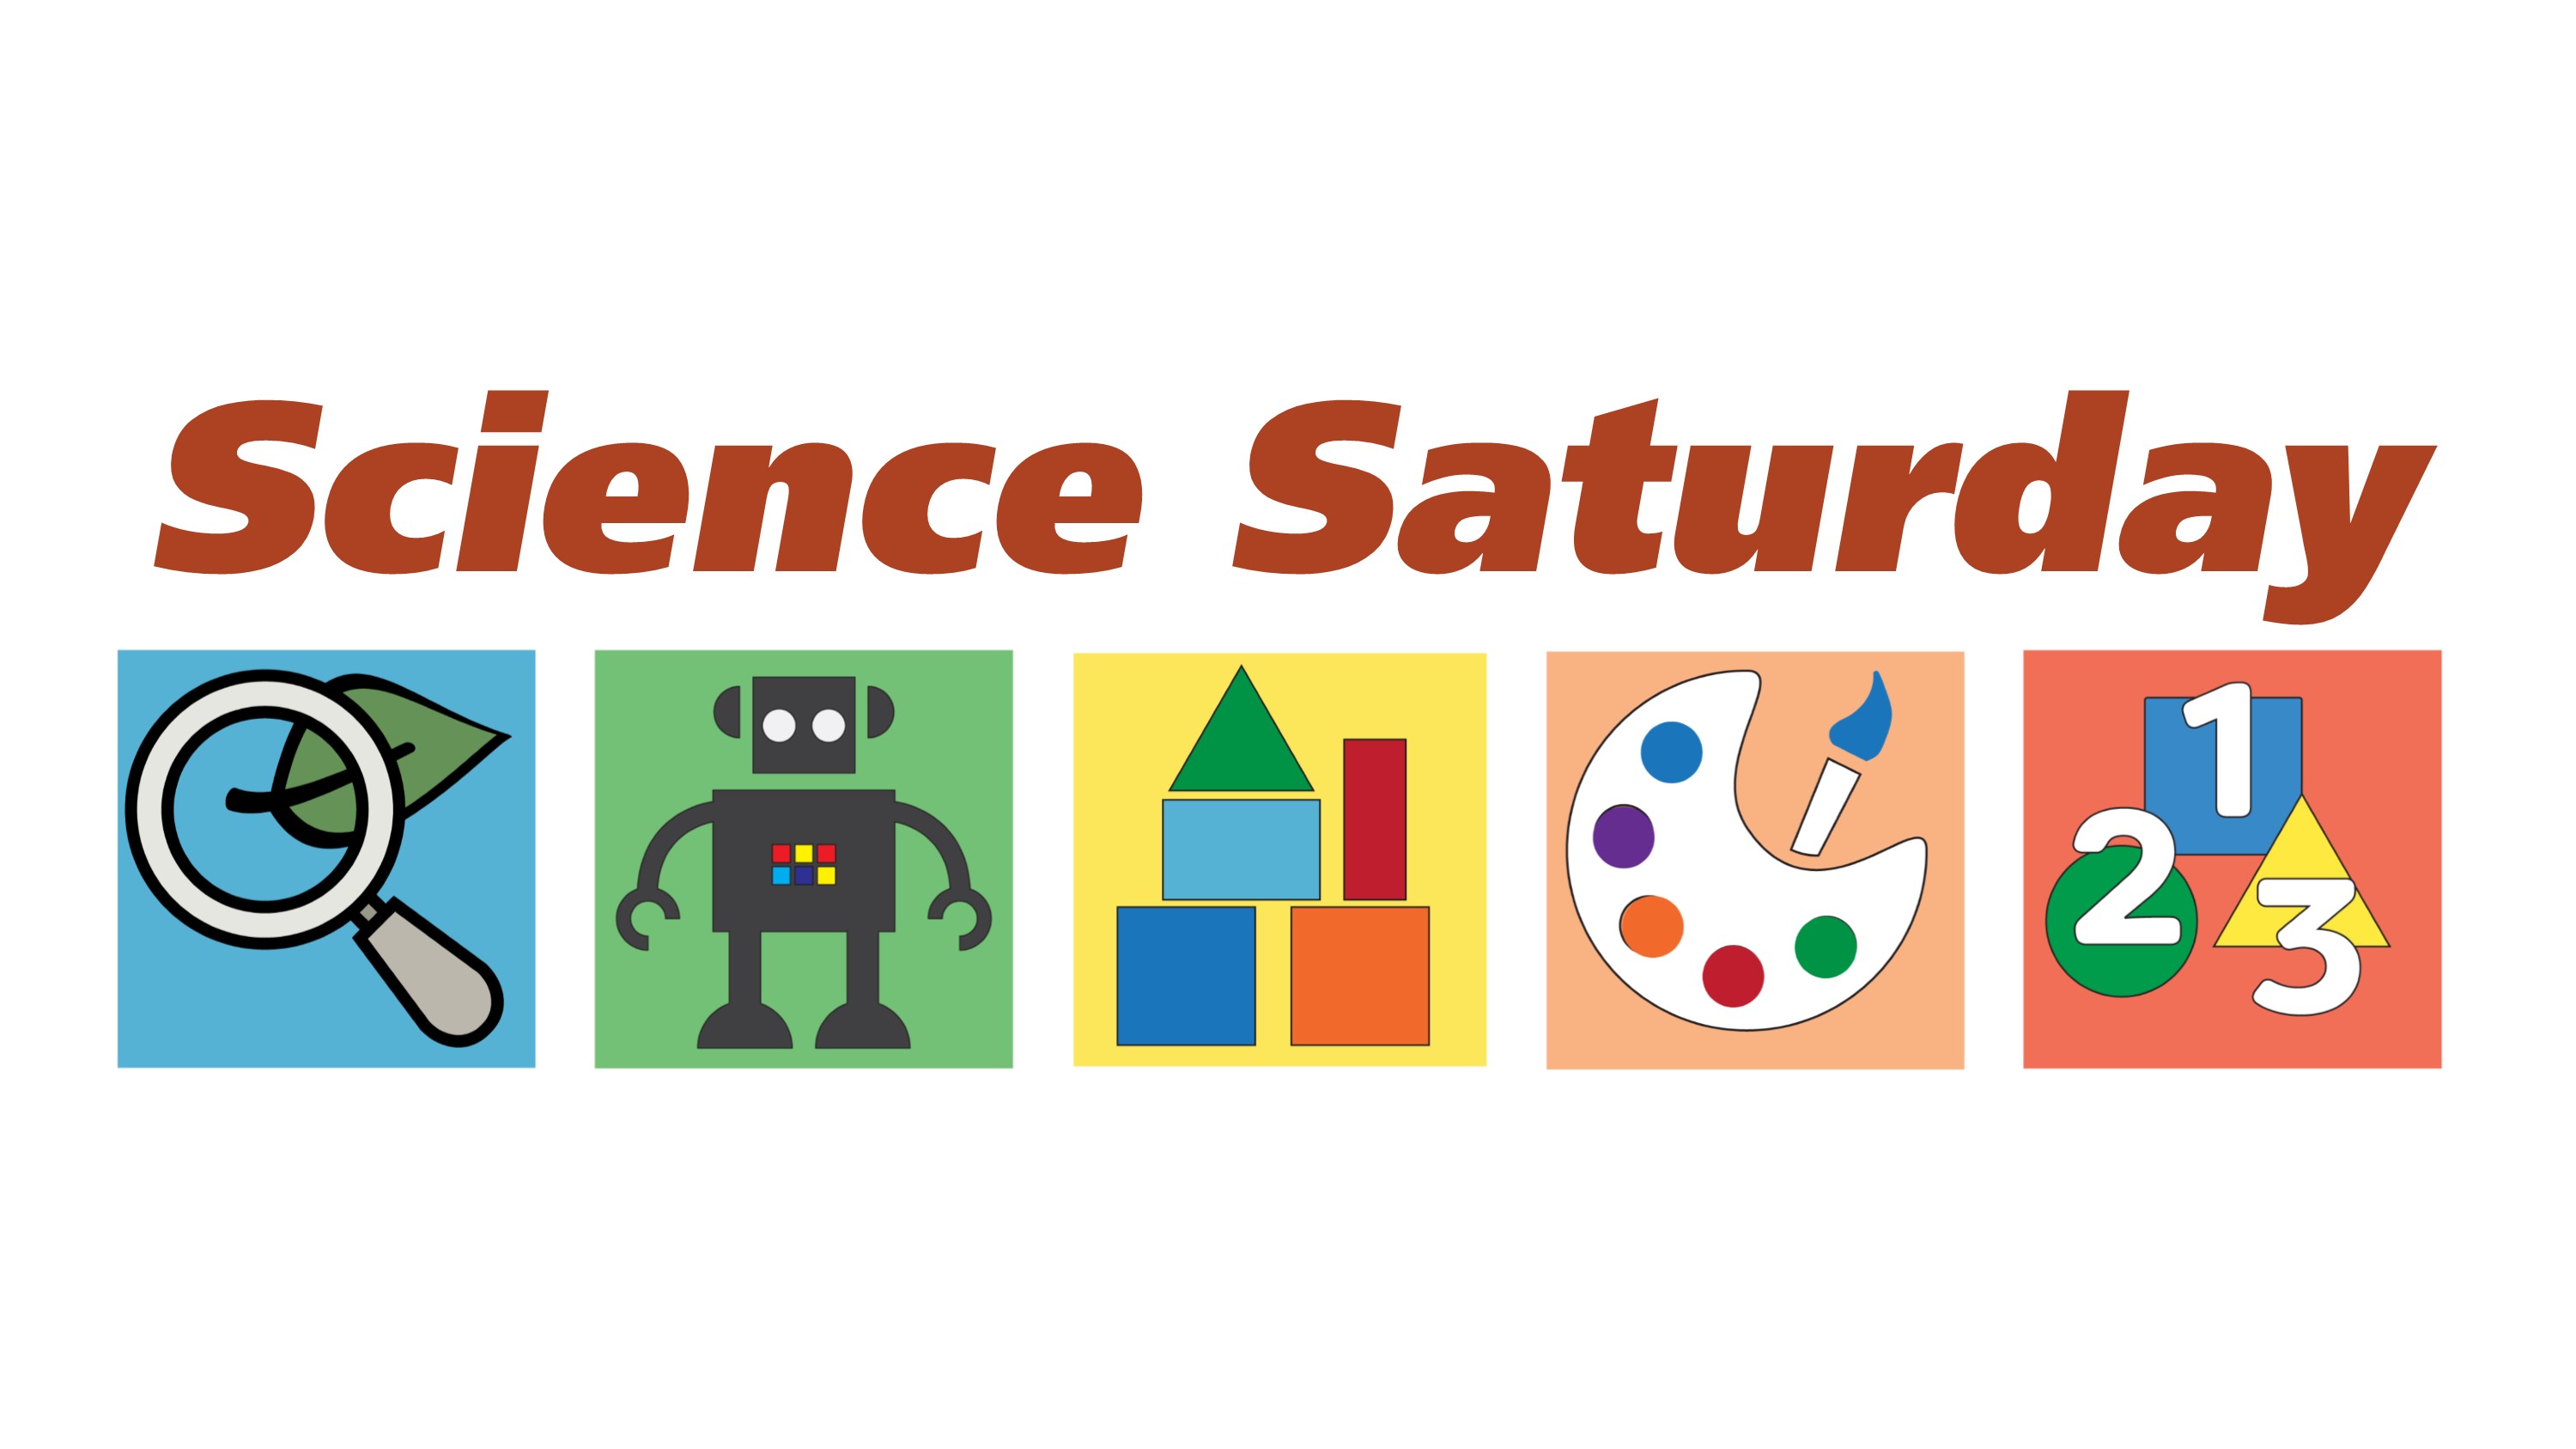 Science Saturday with colorful images of magnifying glass, robot, blocks, paint, and numbers